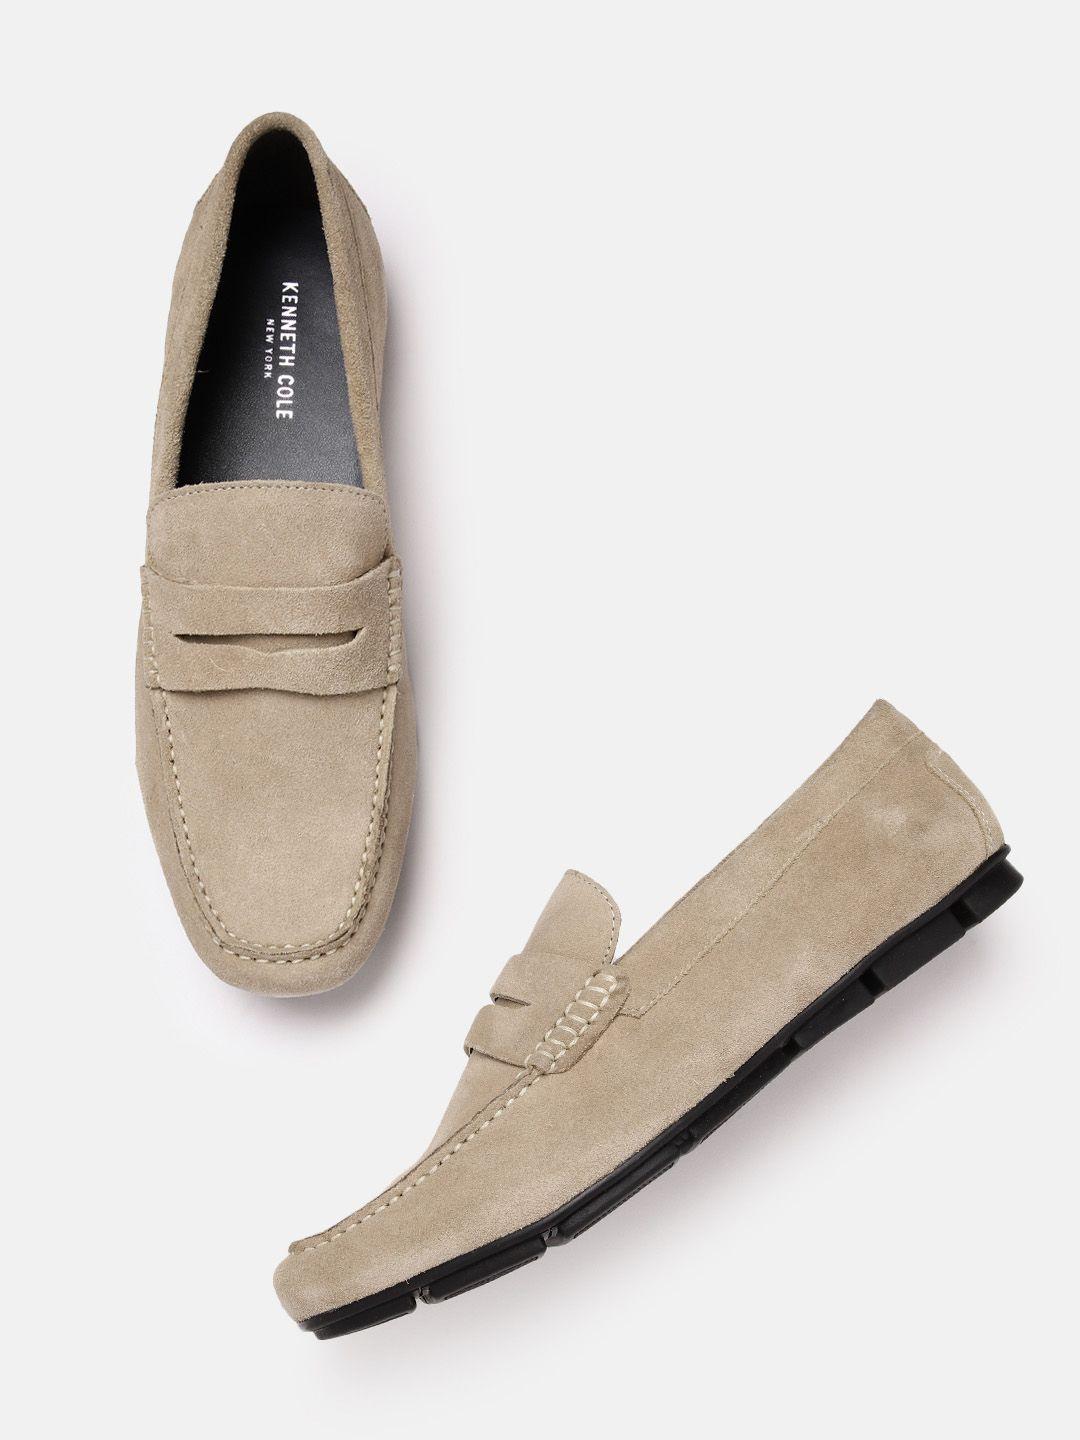 kenneth-cole-men-round-toe-penny-loafers